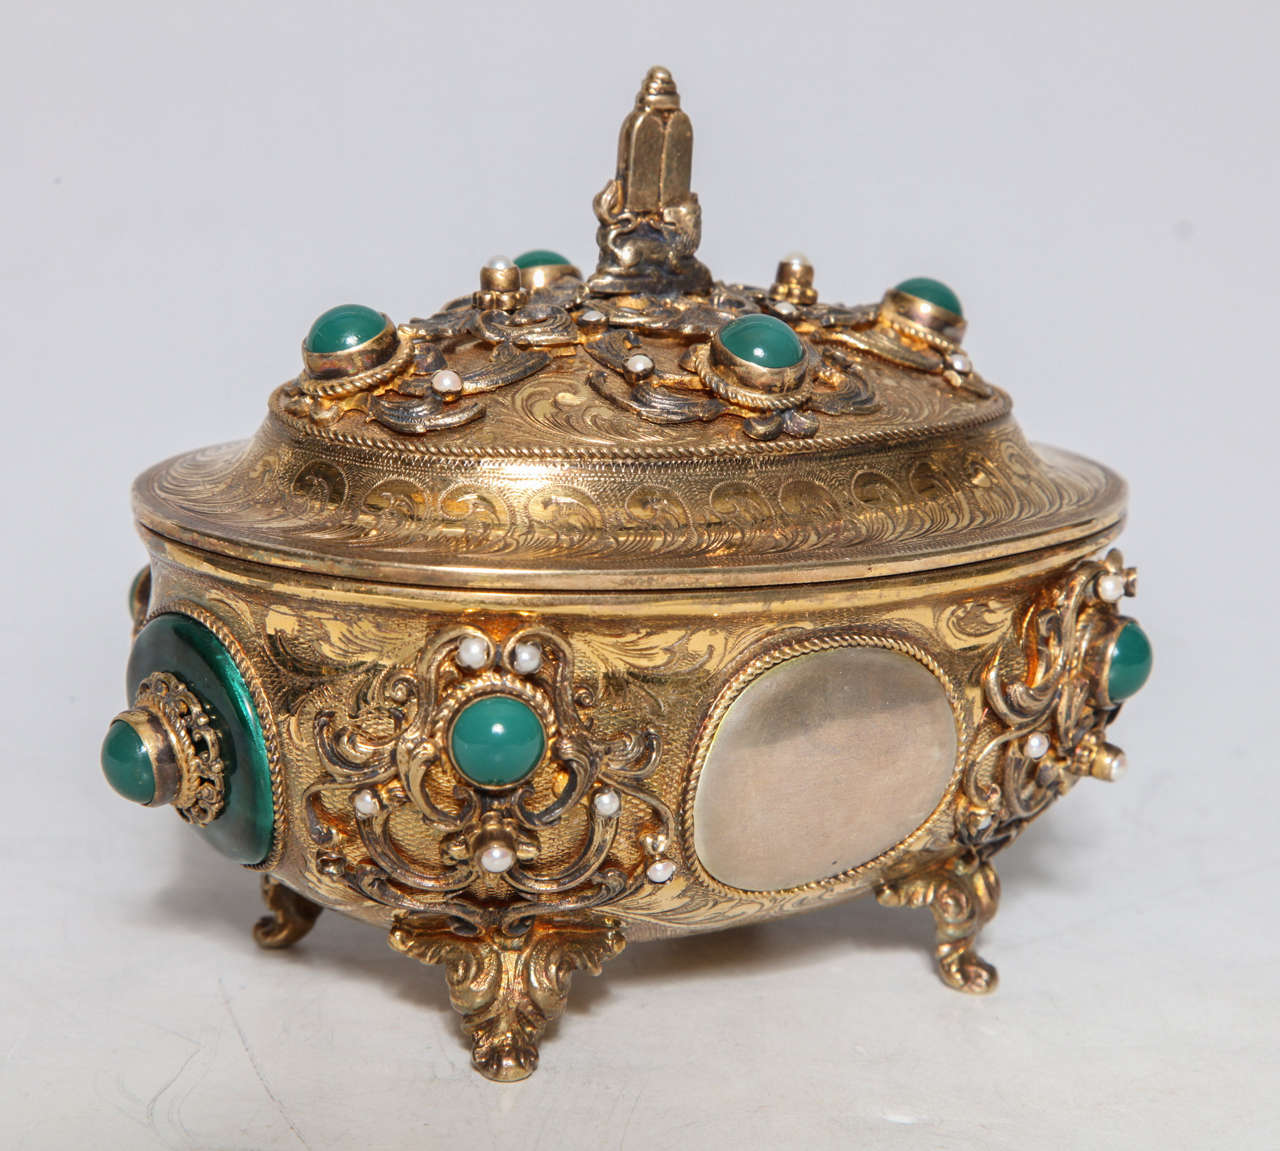 Viennese Judaica Silver Etrog Box exquisitely hand engraved with silver marks on bottom. The symbol of the torah presides on the lid overlooking mother-of-pearl accents inlaid in the curving arabesques. Green enamel and possibly jade cabochon